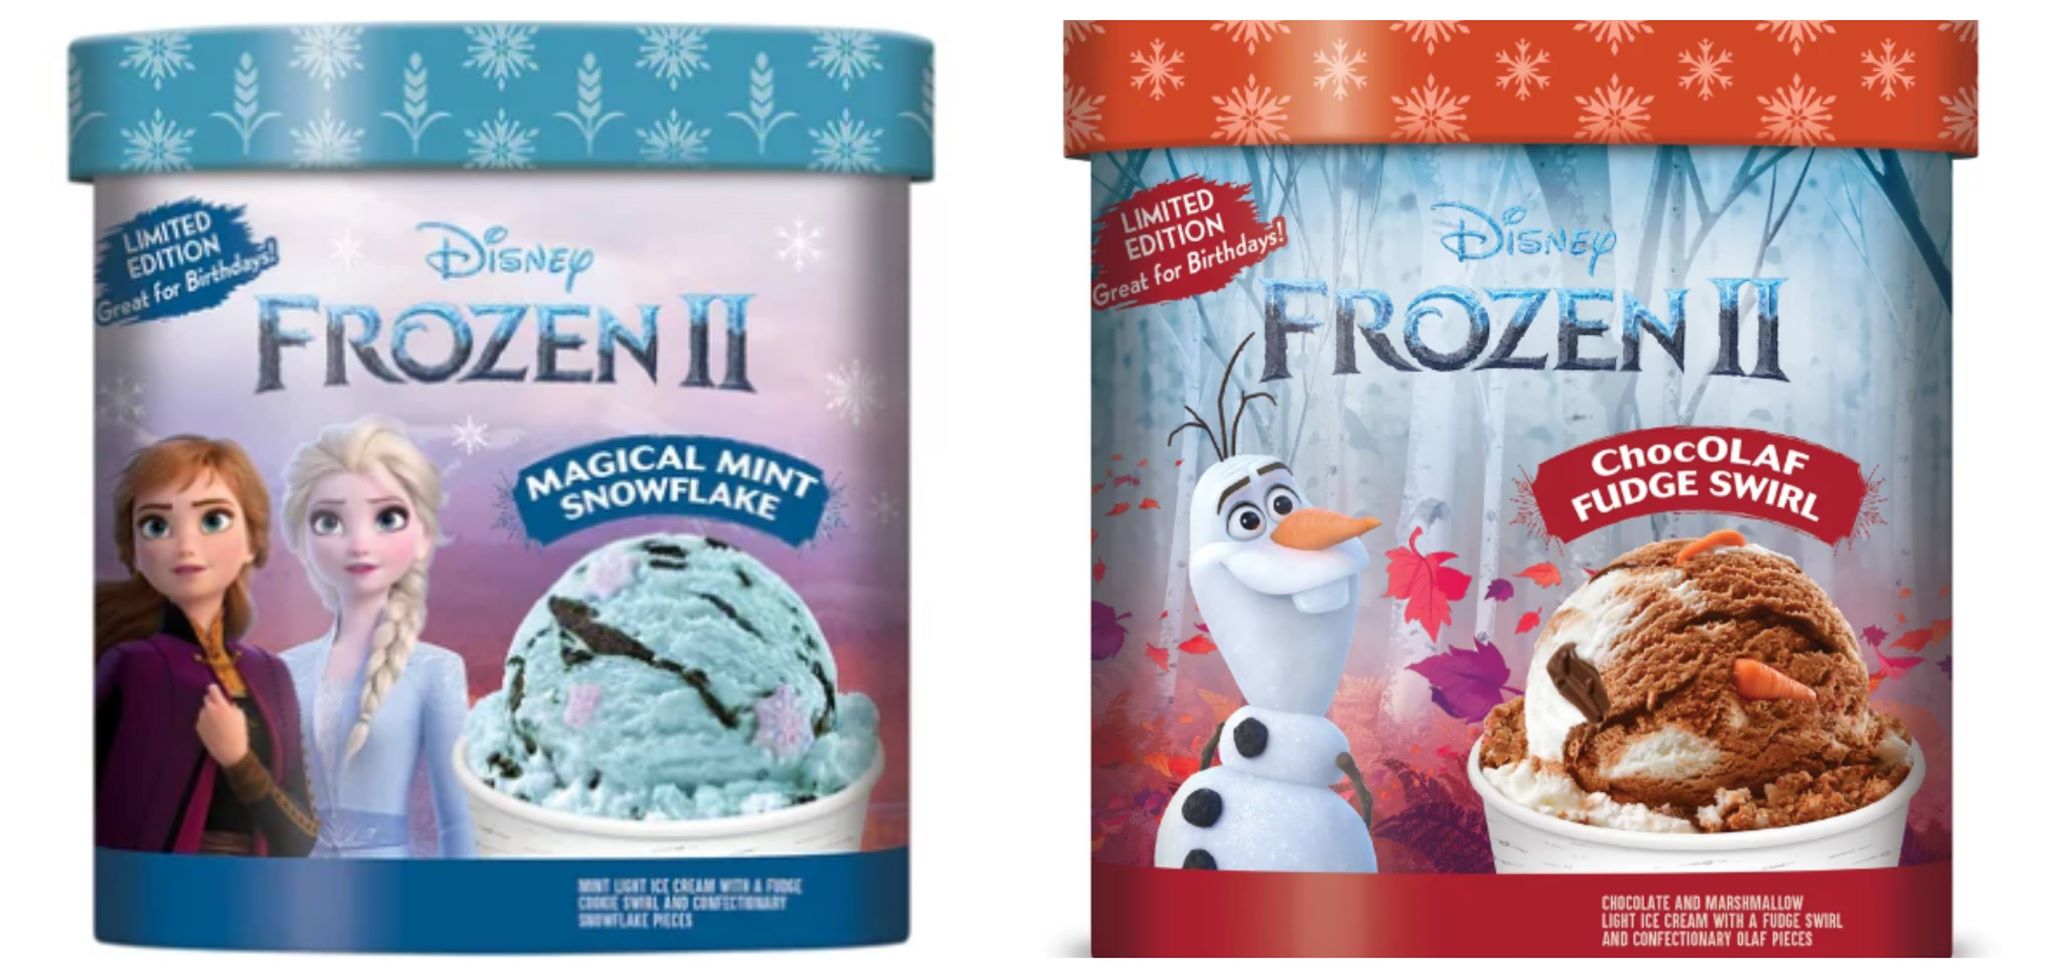 New Frozen 2 Ice Cream Spotted in Grocery Stores